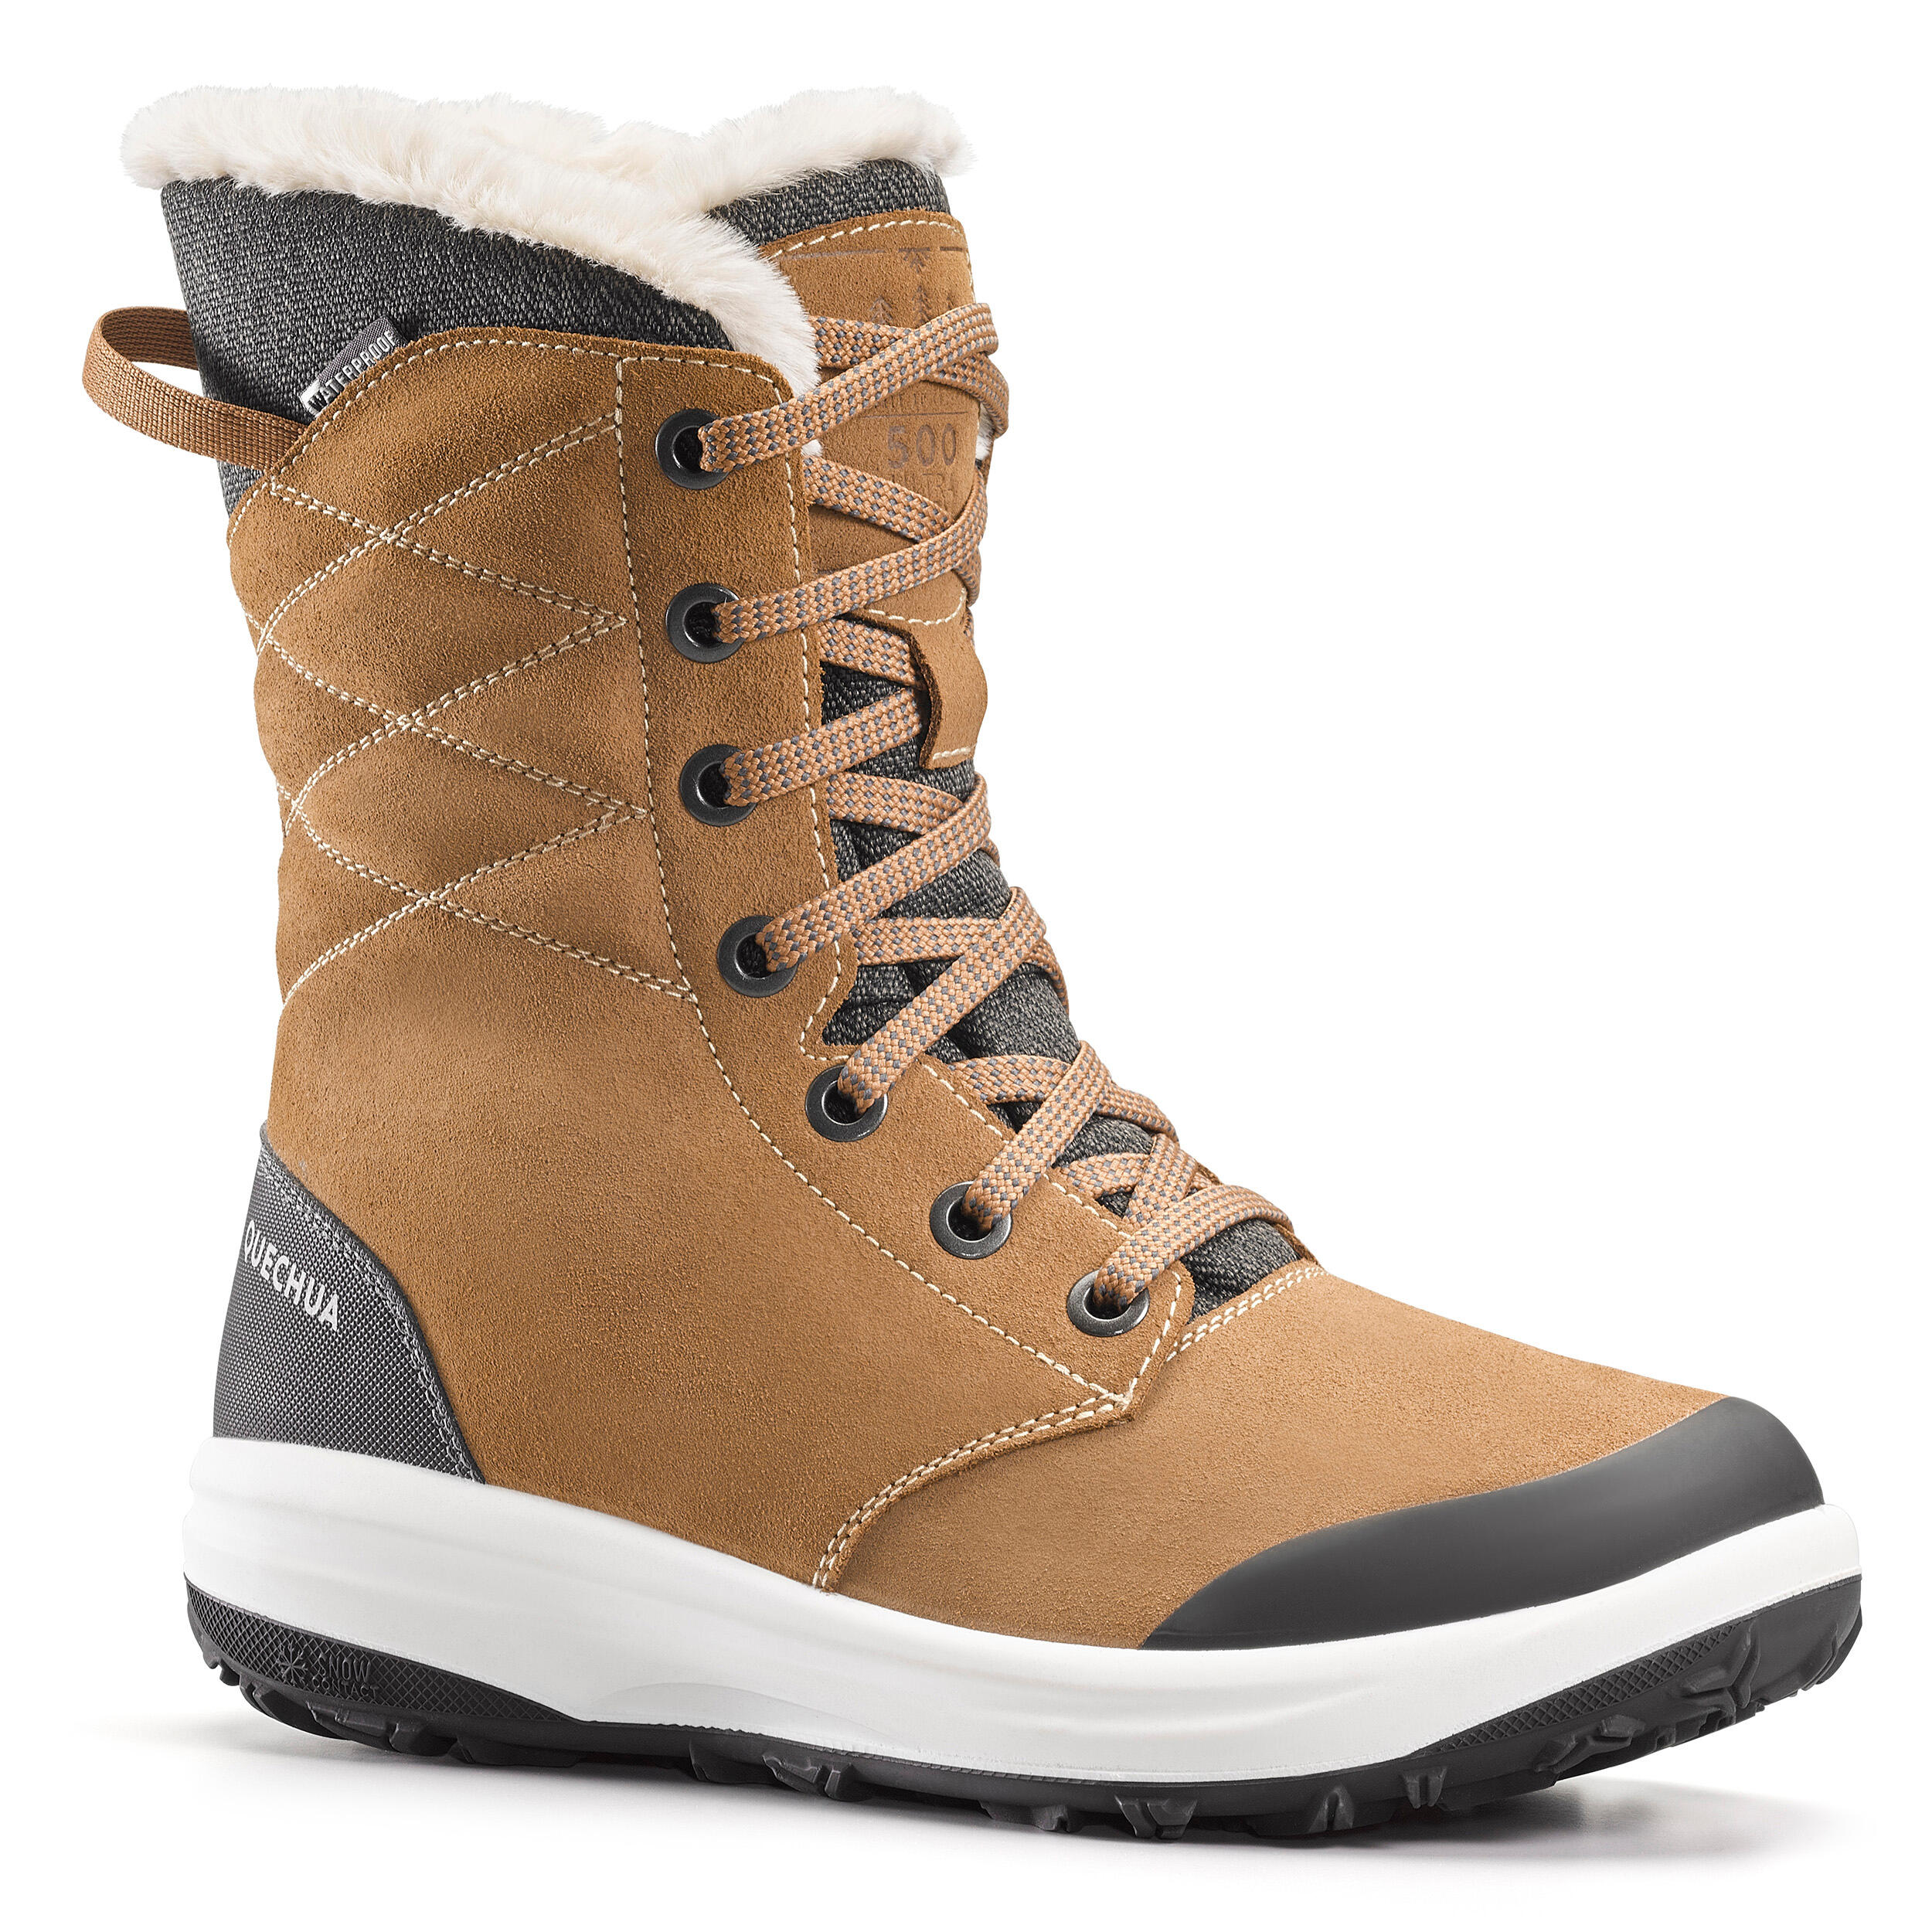 Snow Boots | Winter Boots for Ladies 